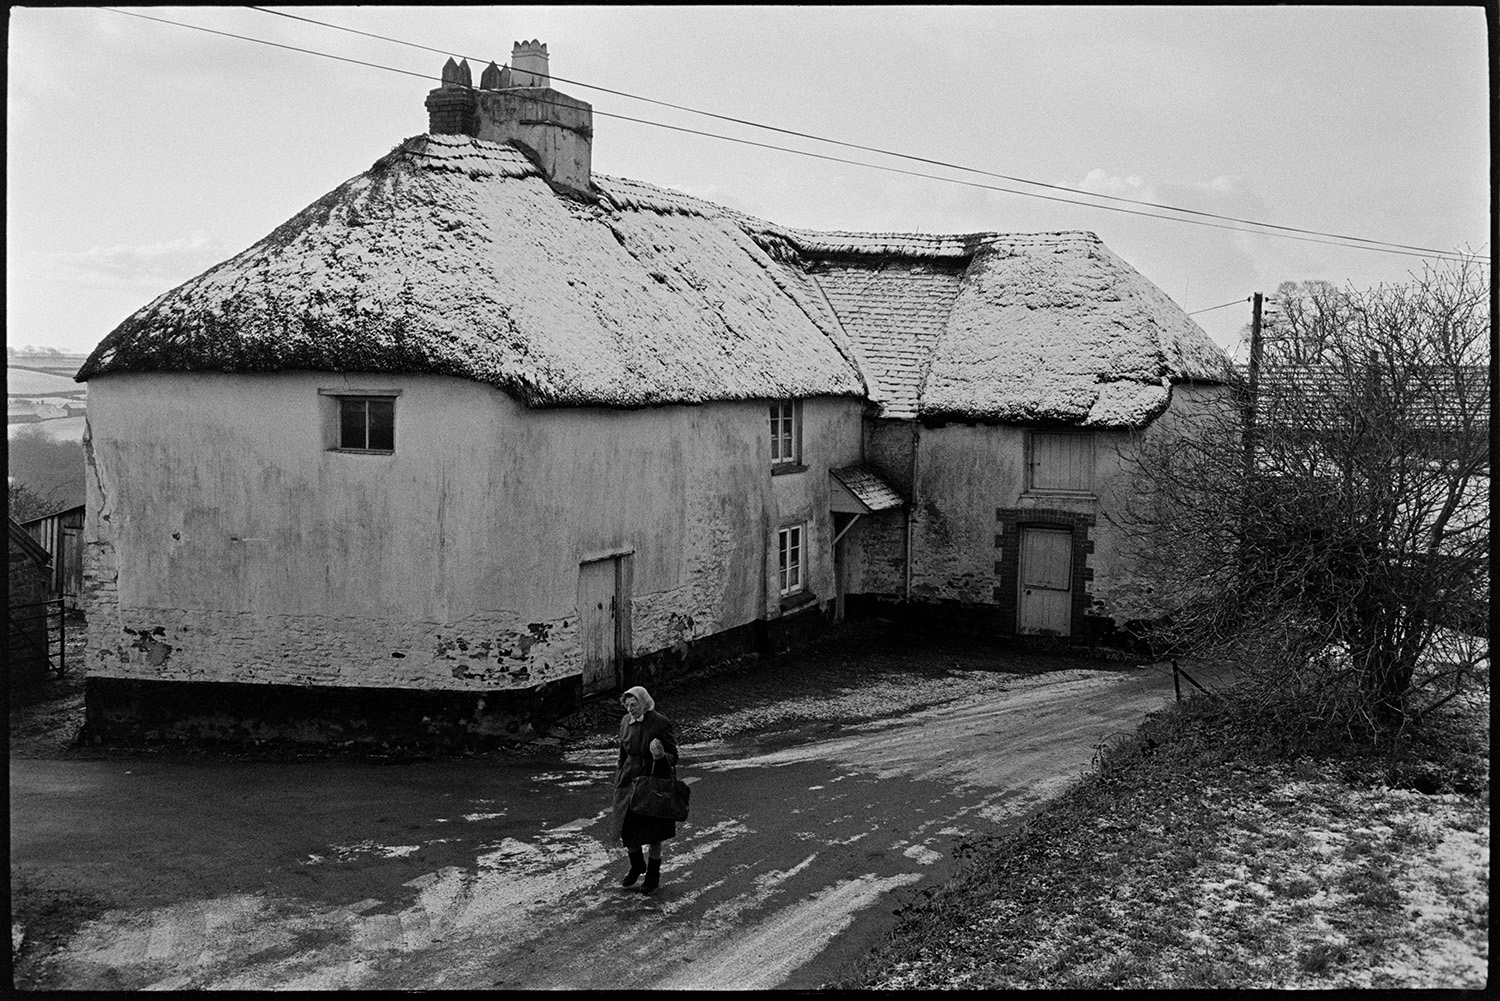 Cob and thatch farm in village in snow.
[A woman walking along an icy road in front of Elliots cob and thatched farmhouse in Roborough. The thatched roof is covered with snow.]